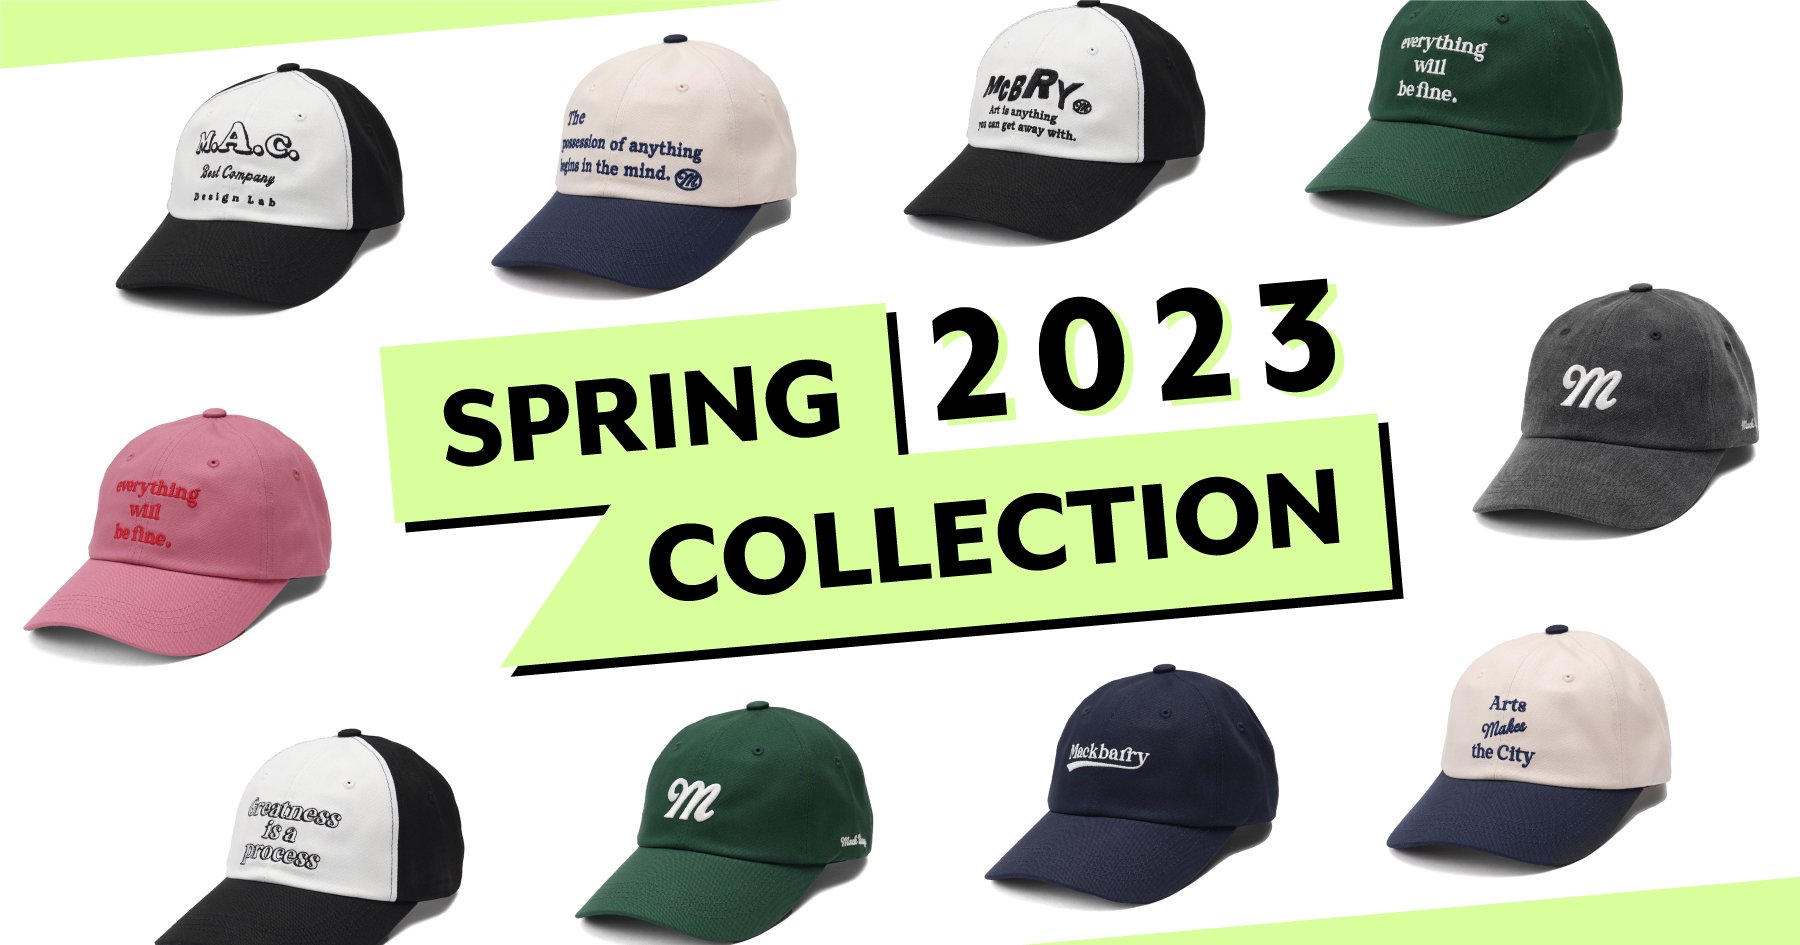 2023 SPRING COLLECTION02